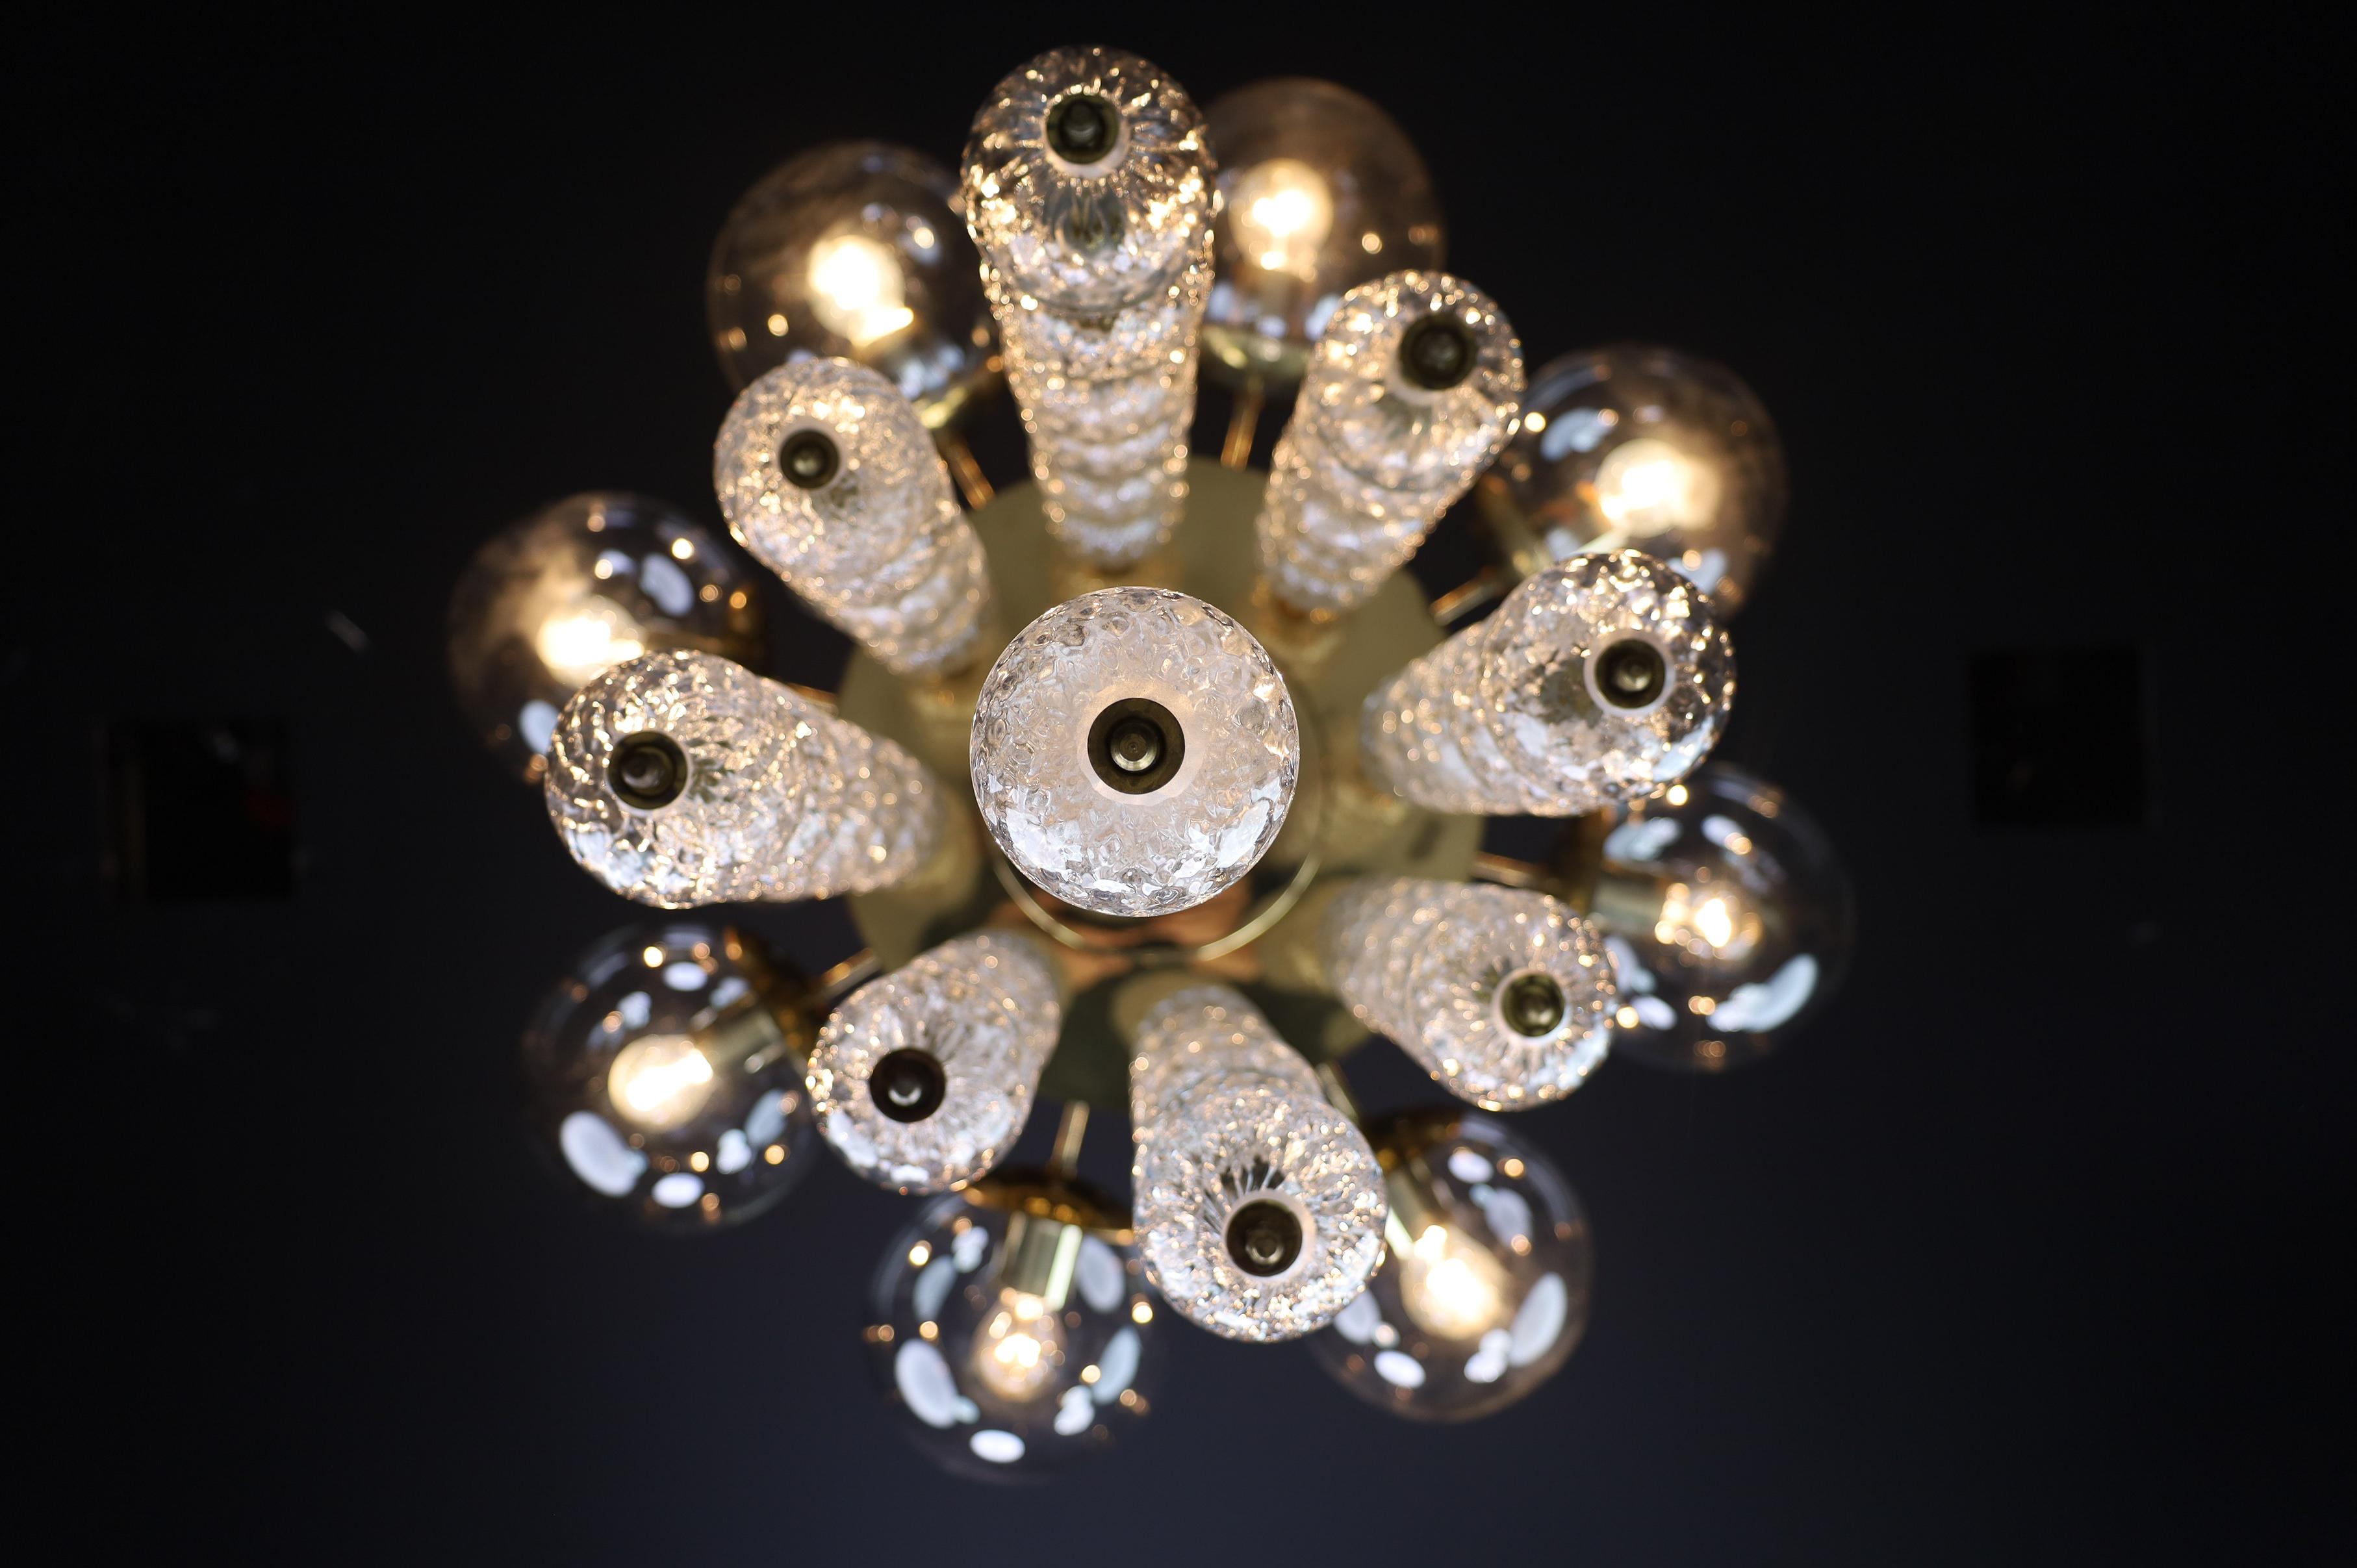 Grand Chandelier with Brass Fixture and Hand-blowed Glass Globes, 1960s For Sale 8